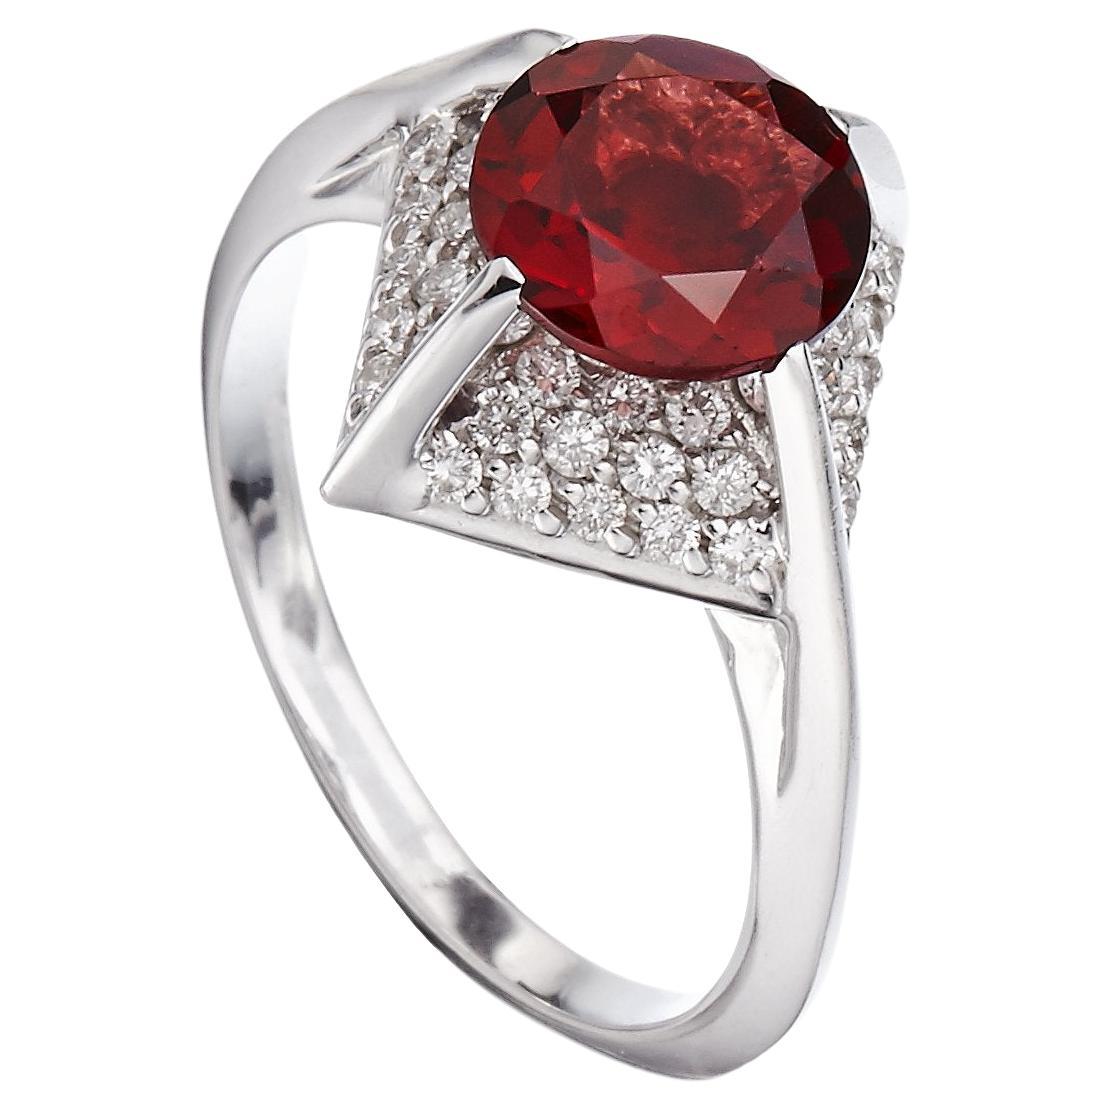 For Sale:  18K White Gold Made in Italy Diamond Rodolite Garnet Vogue Awarded Cocktail Ring 2